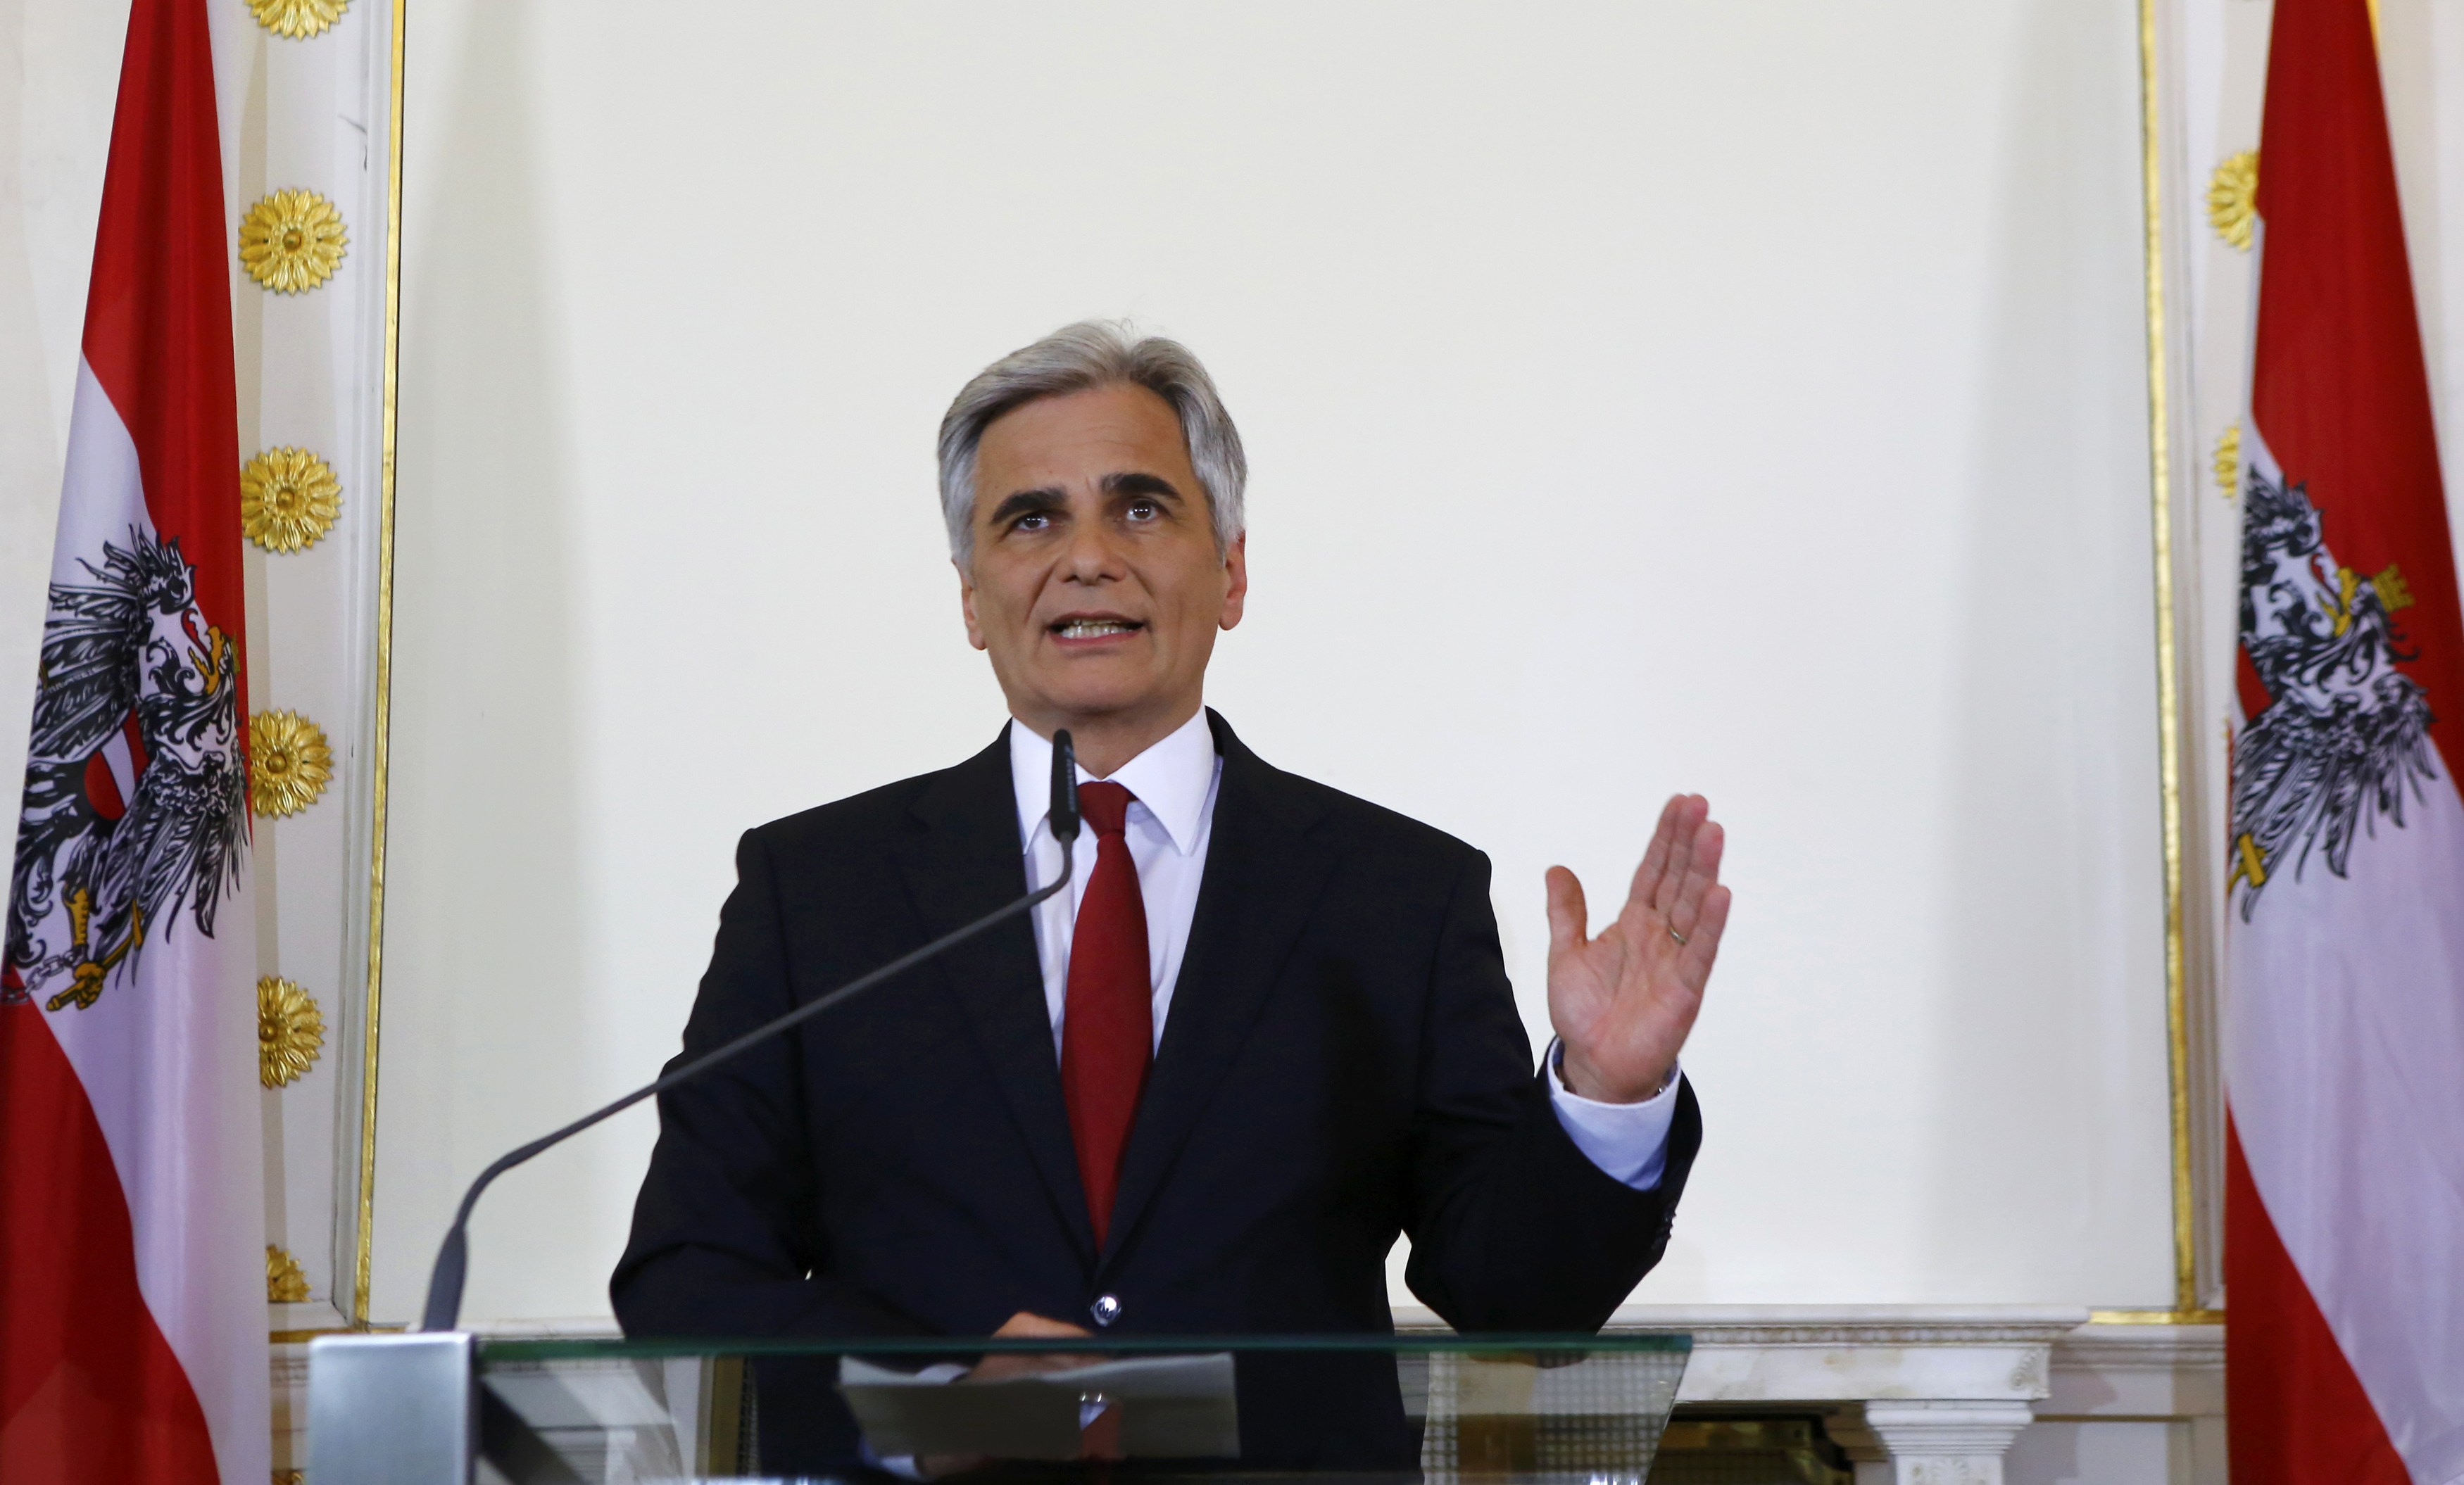 The fall of Austria's Chancellor Faymann bodes ill for Merkel